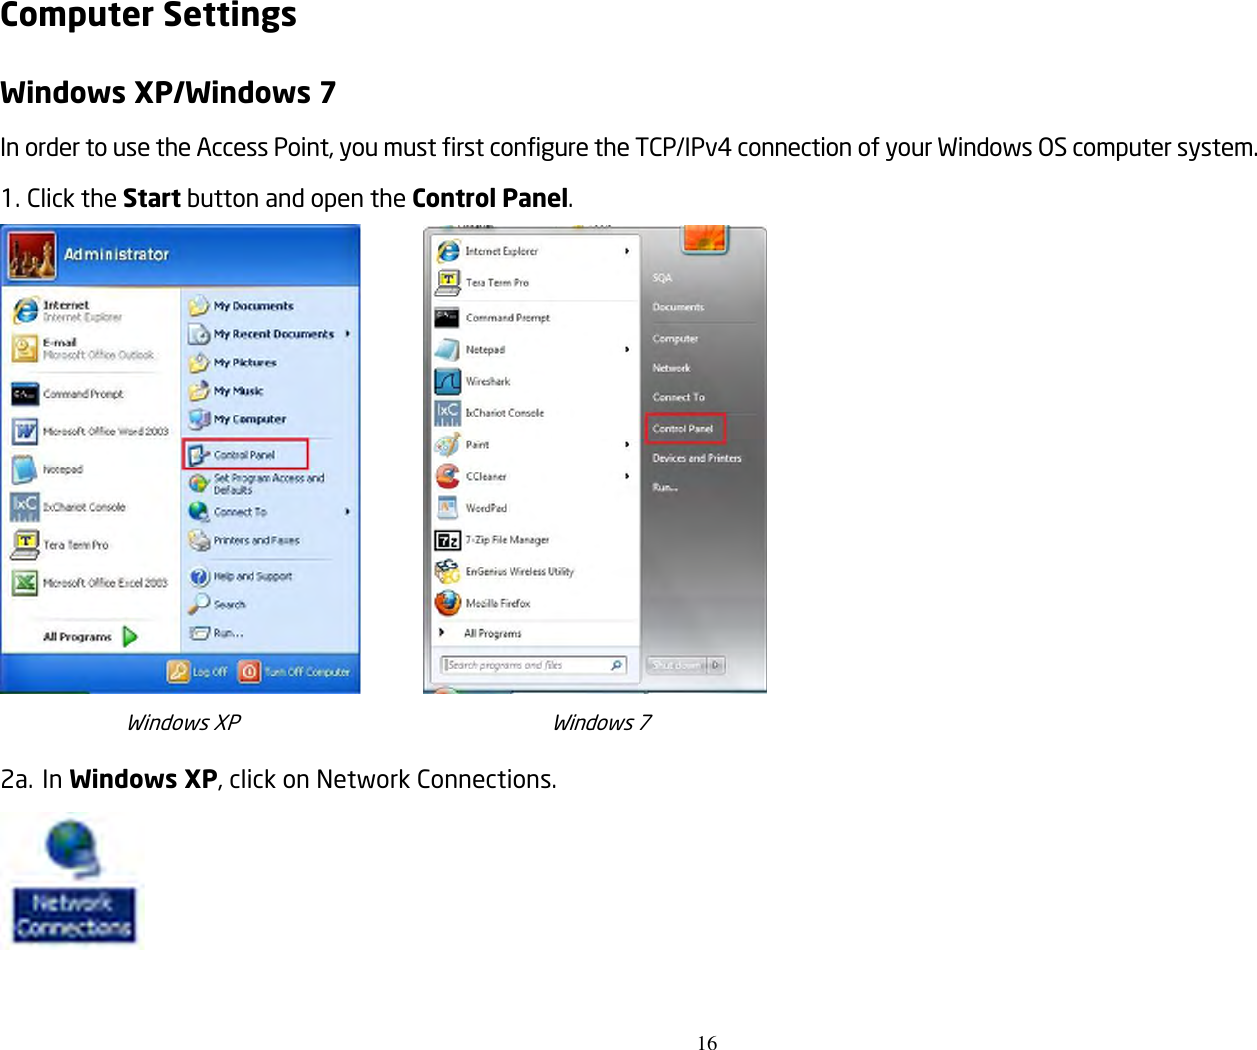 16  Computer Settings Windows XP/Windows 7 In order to use the Access Point, you must first configure the TCP/IPv4 connection of your Windows OS computer system. 1. Click the Start button and open the Control Panel.          Windows XP                                                            Windows 7 2a. In Windows XP, click on Network Connections.   